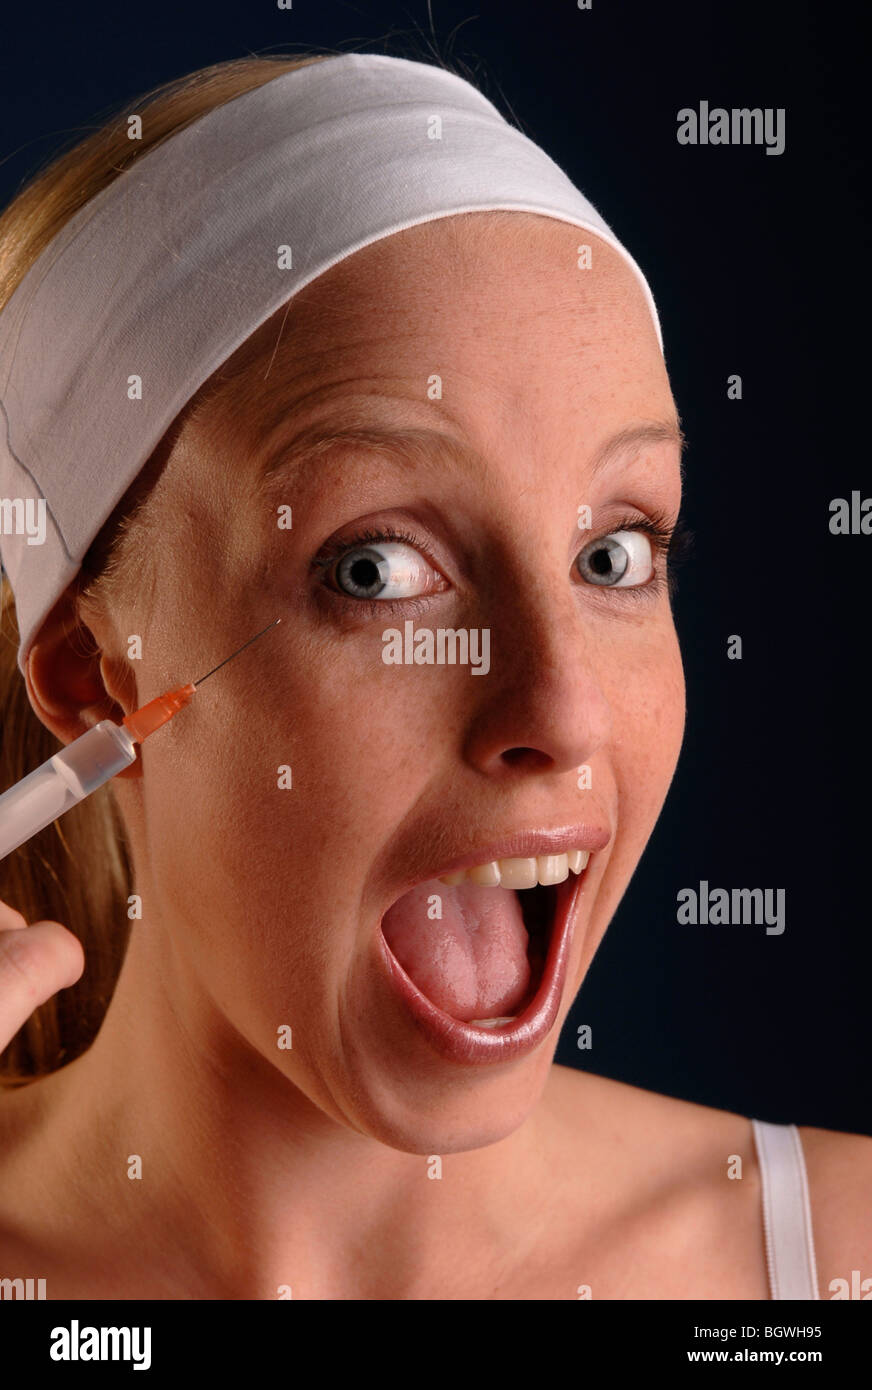 Young woman holding a syringe in her hand Stock Photo